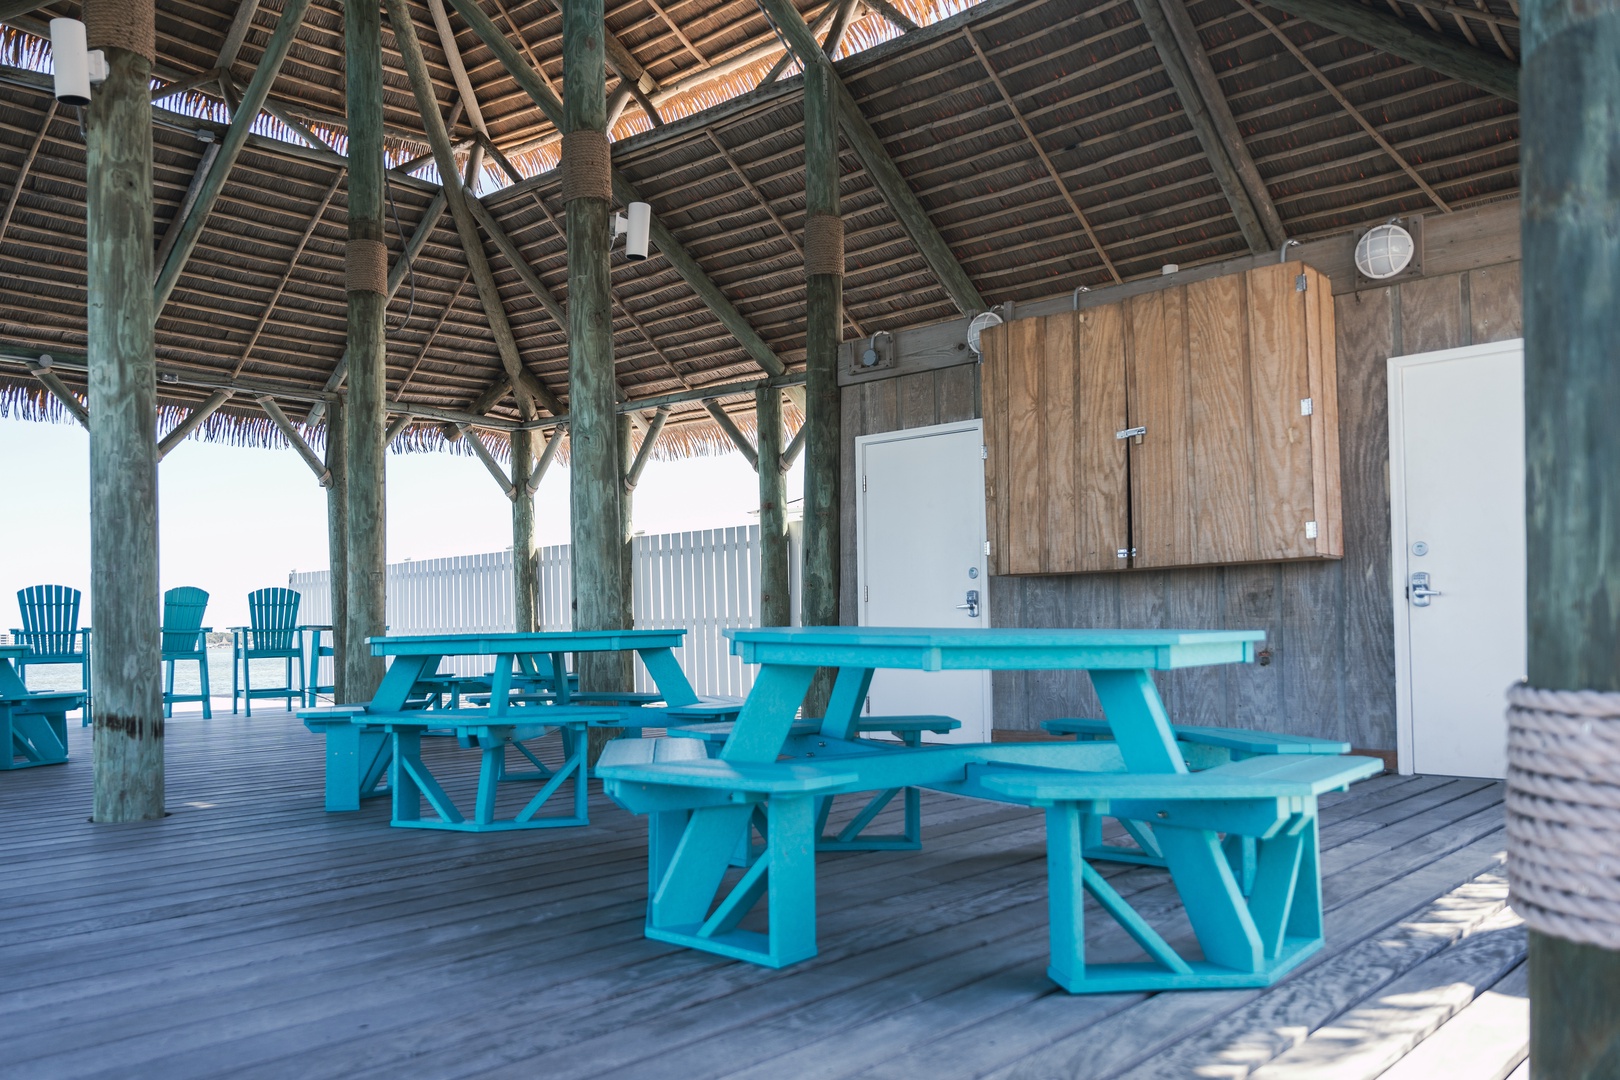 Enjoy scenic bay views and a meal with your group at the picnic tables in the tiki hut